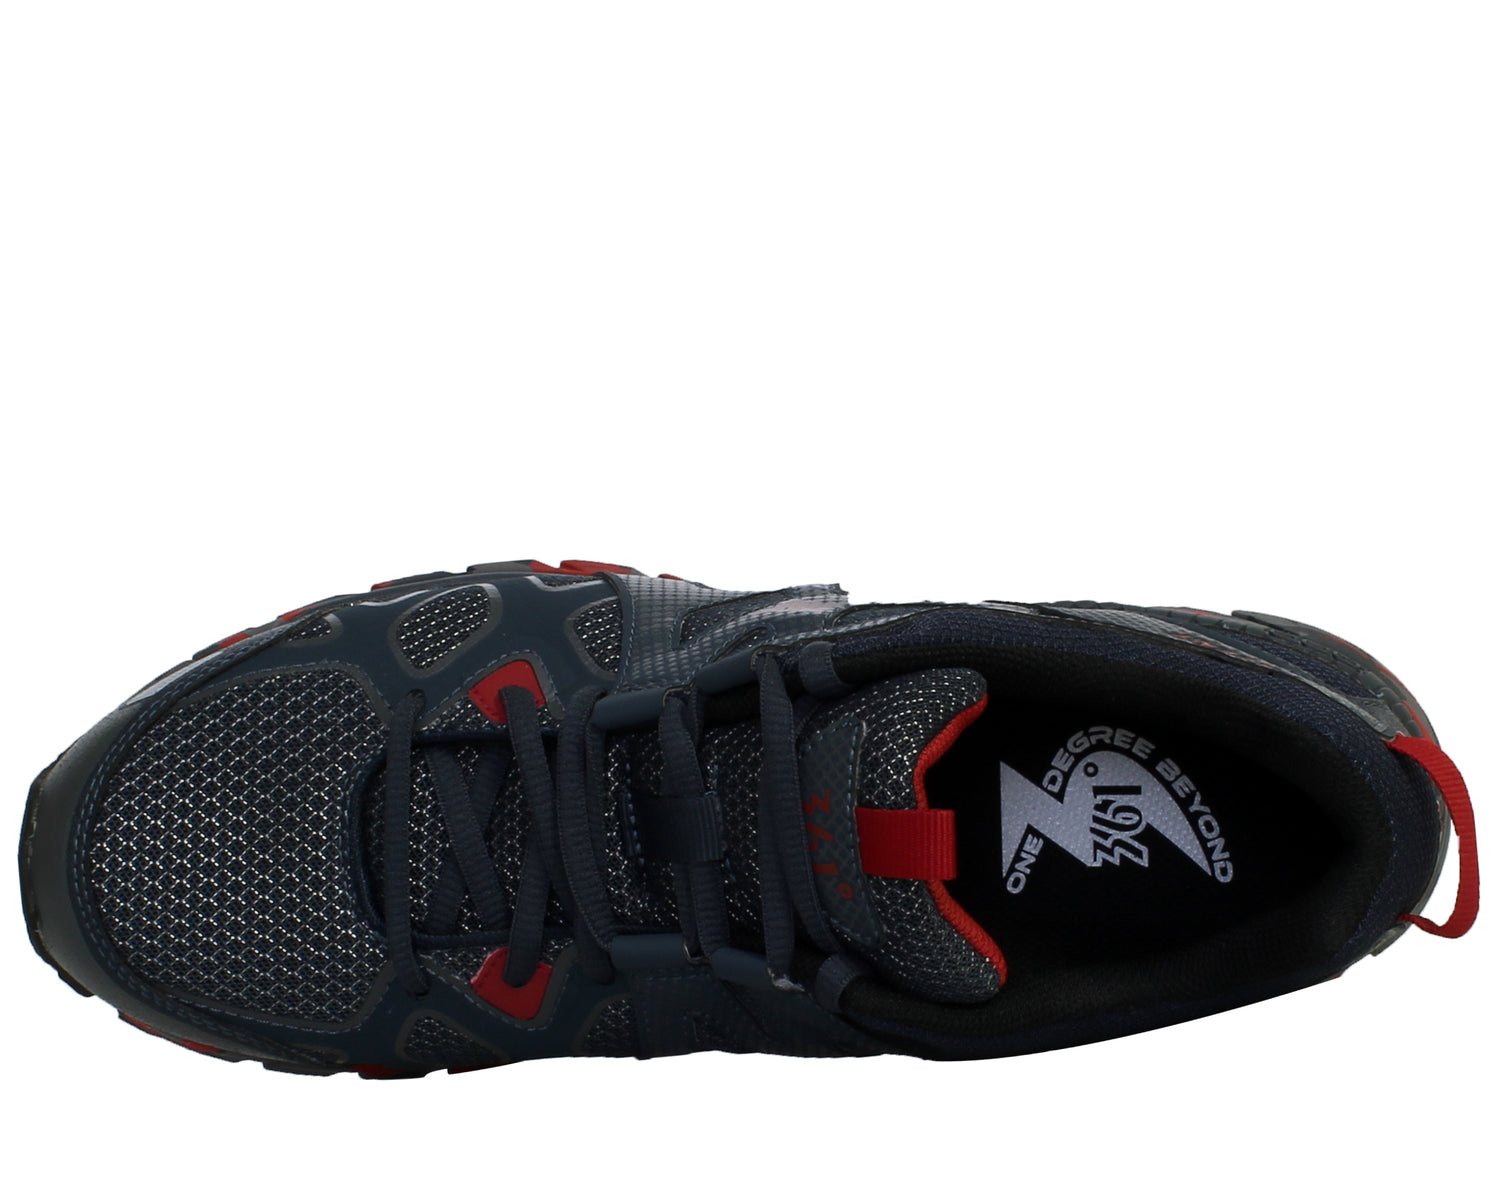 361° Ascent Men's Trail Running Shoes